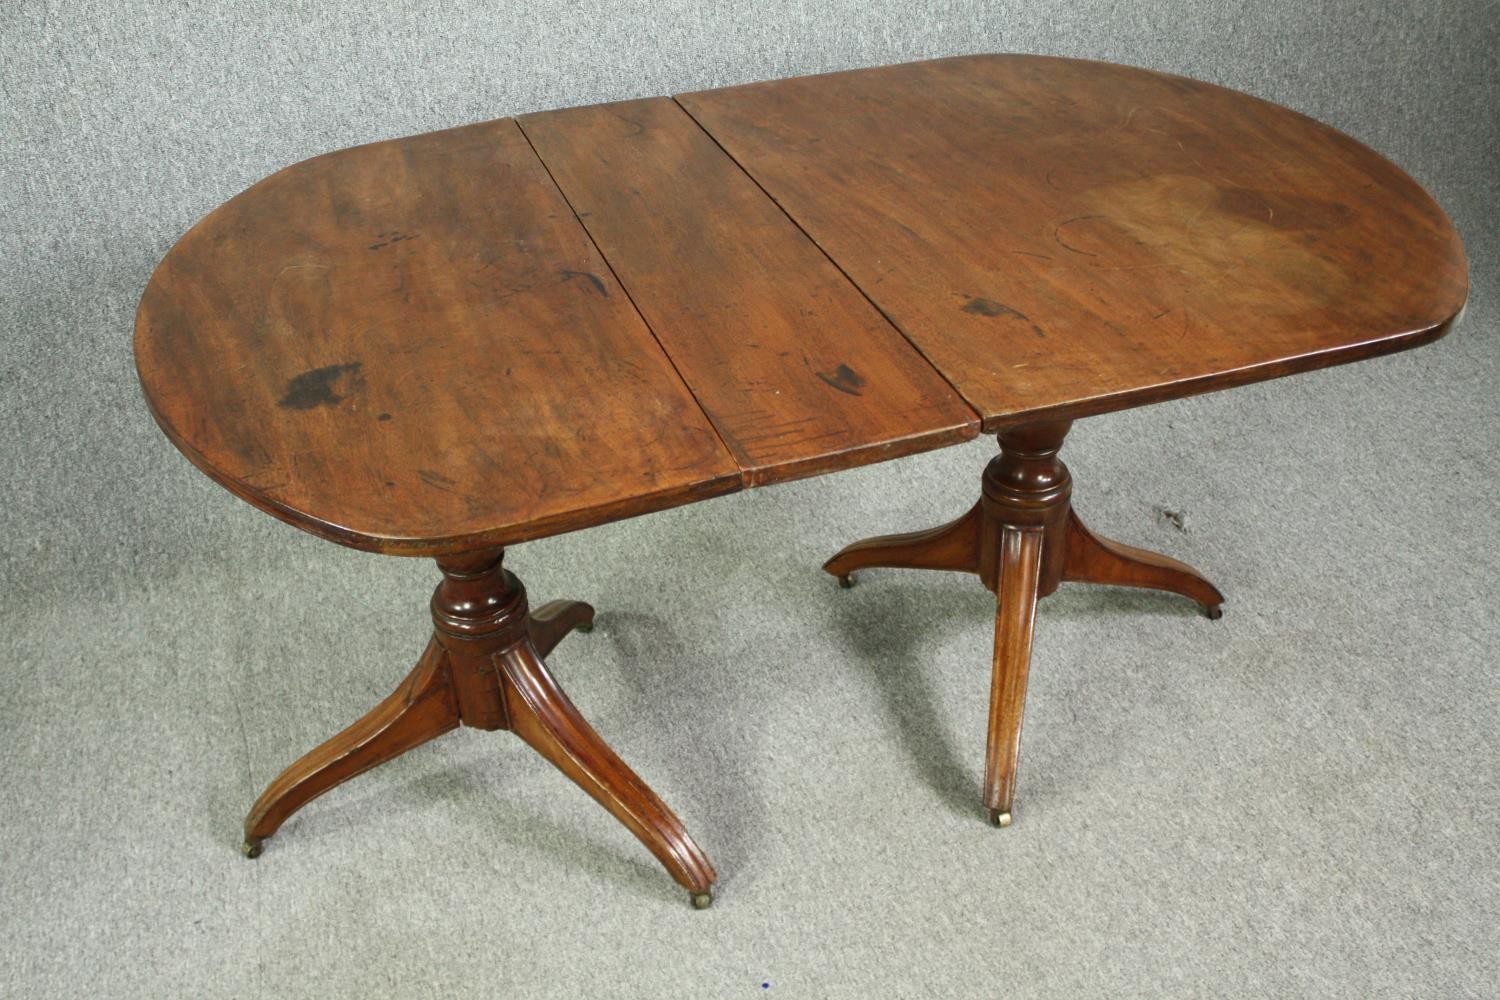 A late Georgian pedestal 'D' end mahogany dining table, with drop flap central leaf. H.73 W.144(ext) - Image 3 of 5